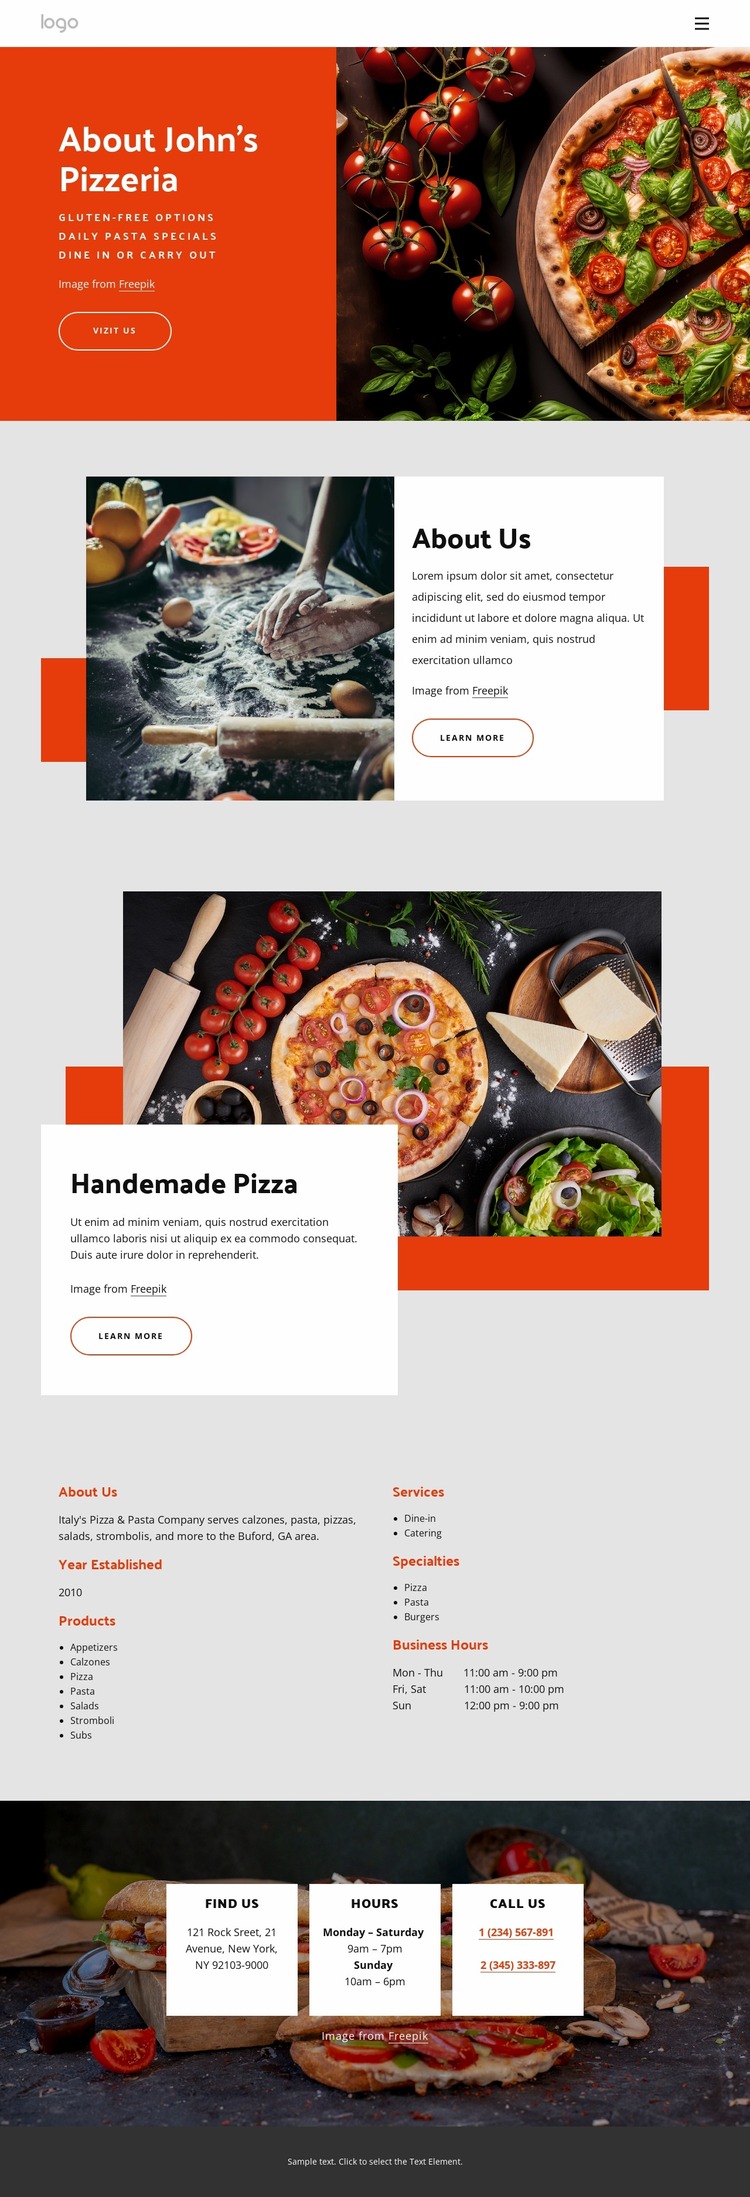 About our pizzeria Website Mockup